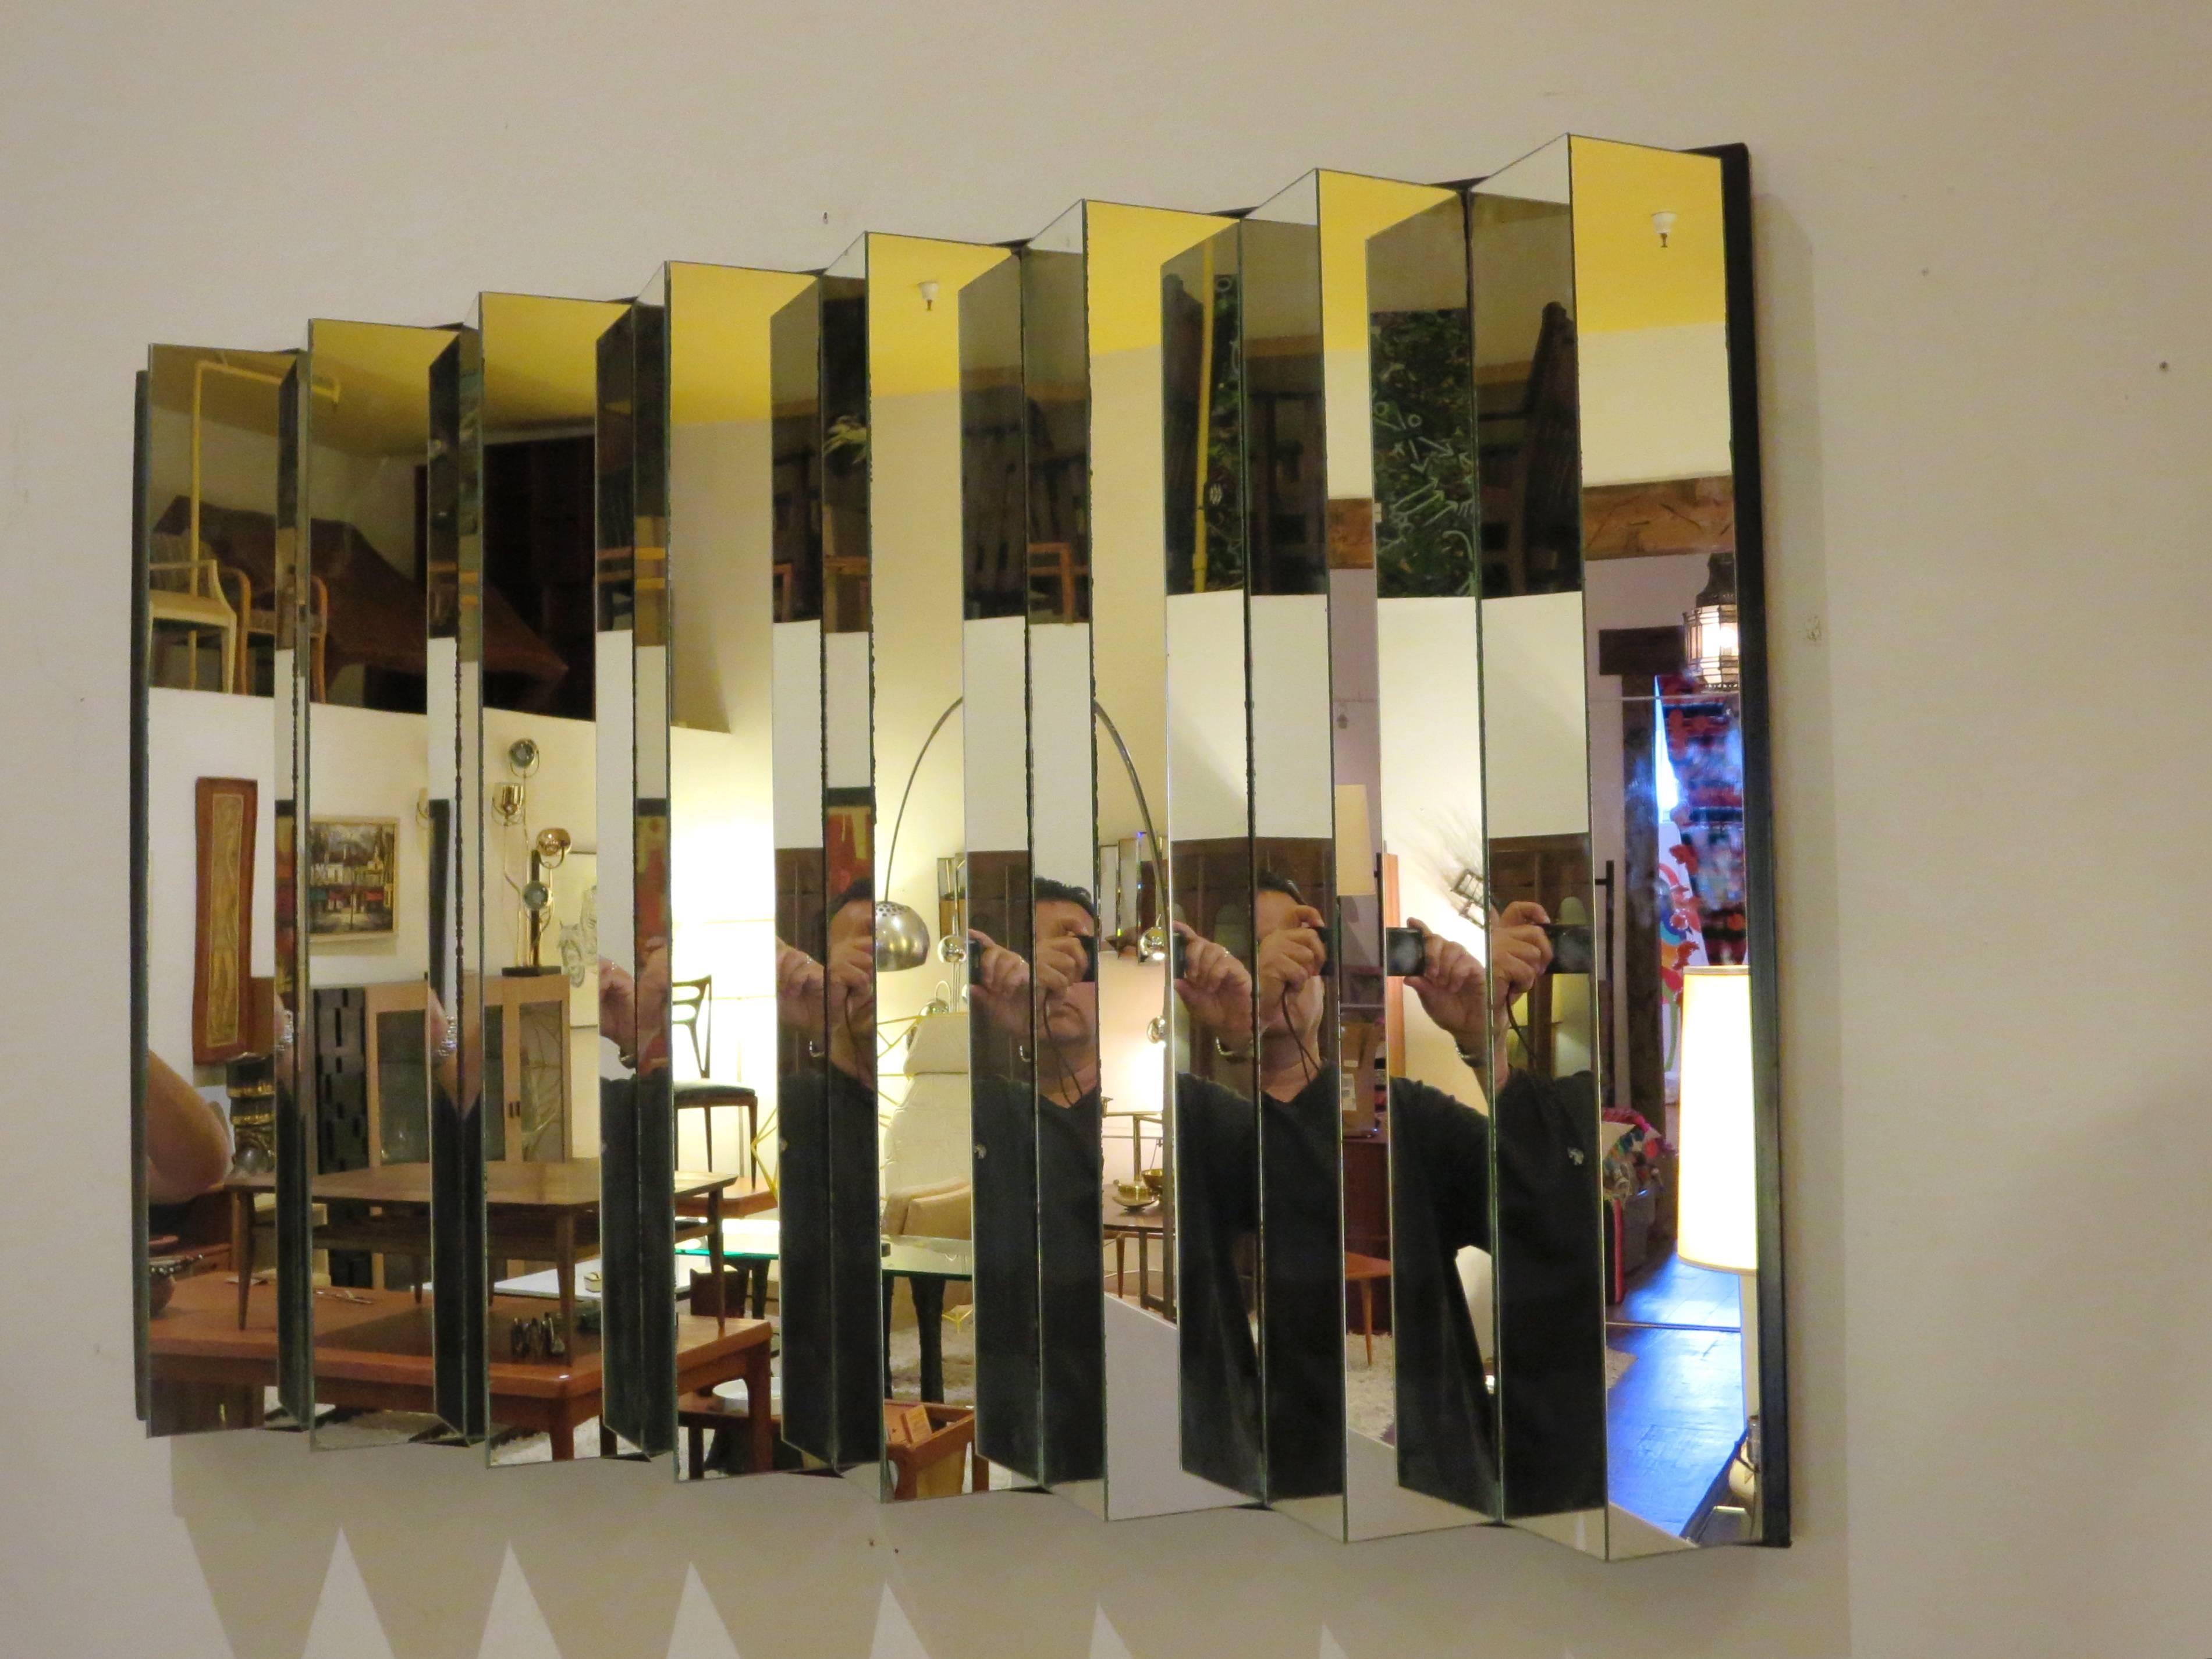 Incredible rare zig-zag multifaceted mirror, wall-mounted, can be hang vertical or horizontal, circa 1970s, with black plastic base on top of wood, no chips or cracks only natural imperfections due to age on the edge as shown, the mirrors were done